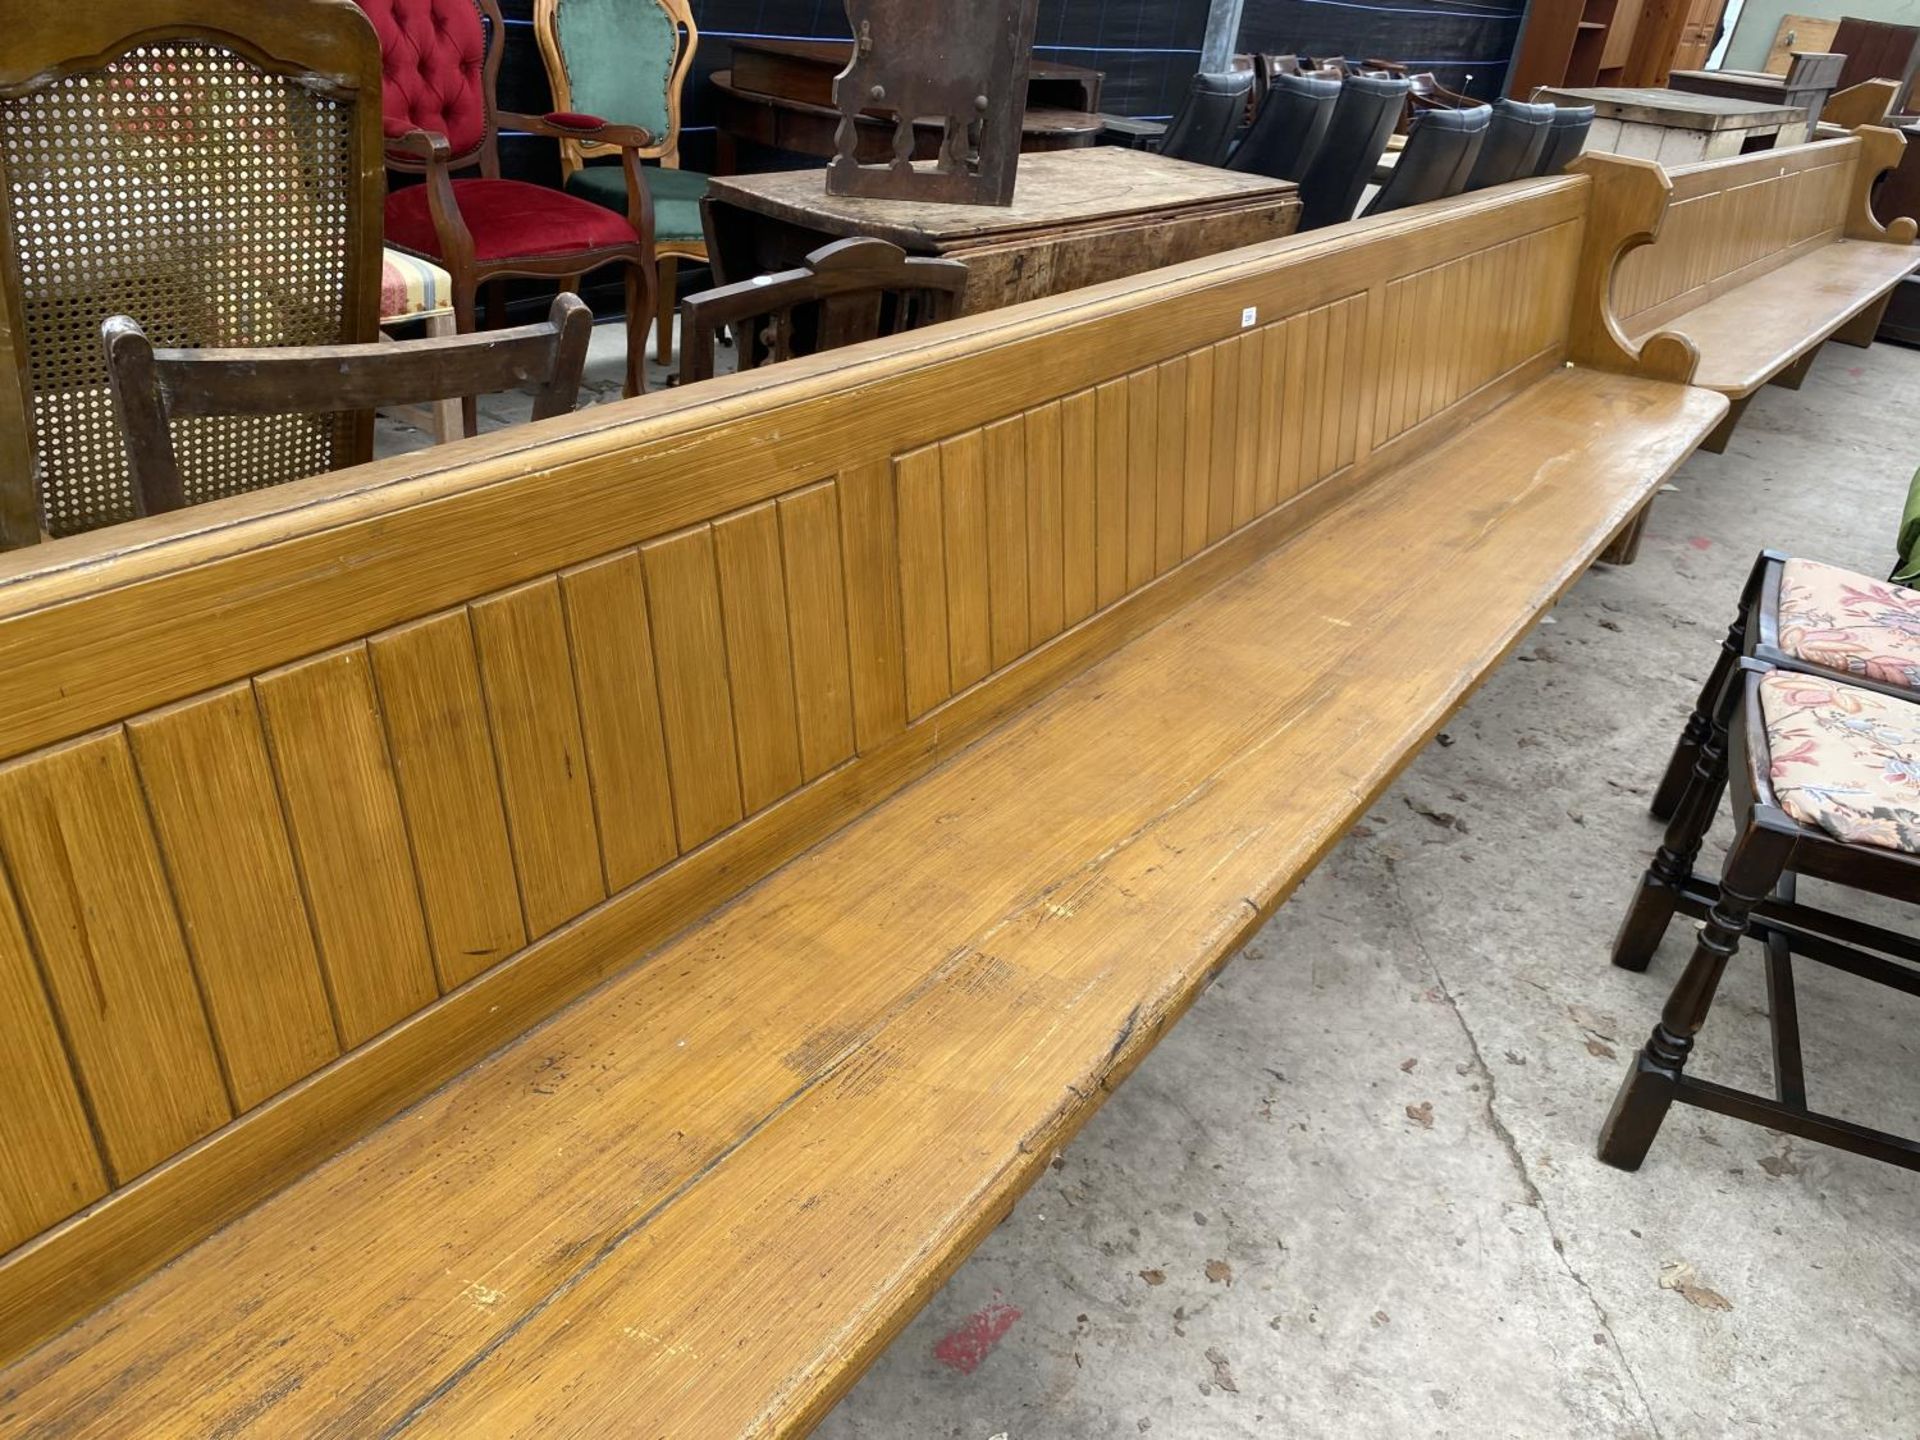 A VICTORIAN PINE OAK GRAINED PEW, 156" WIDE - Image 2 of 2